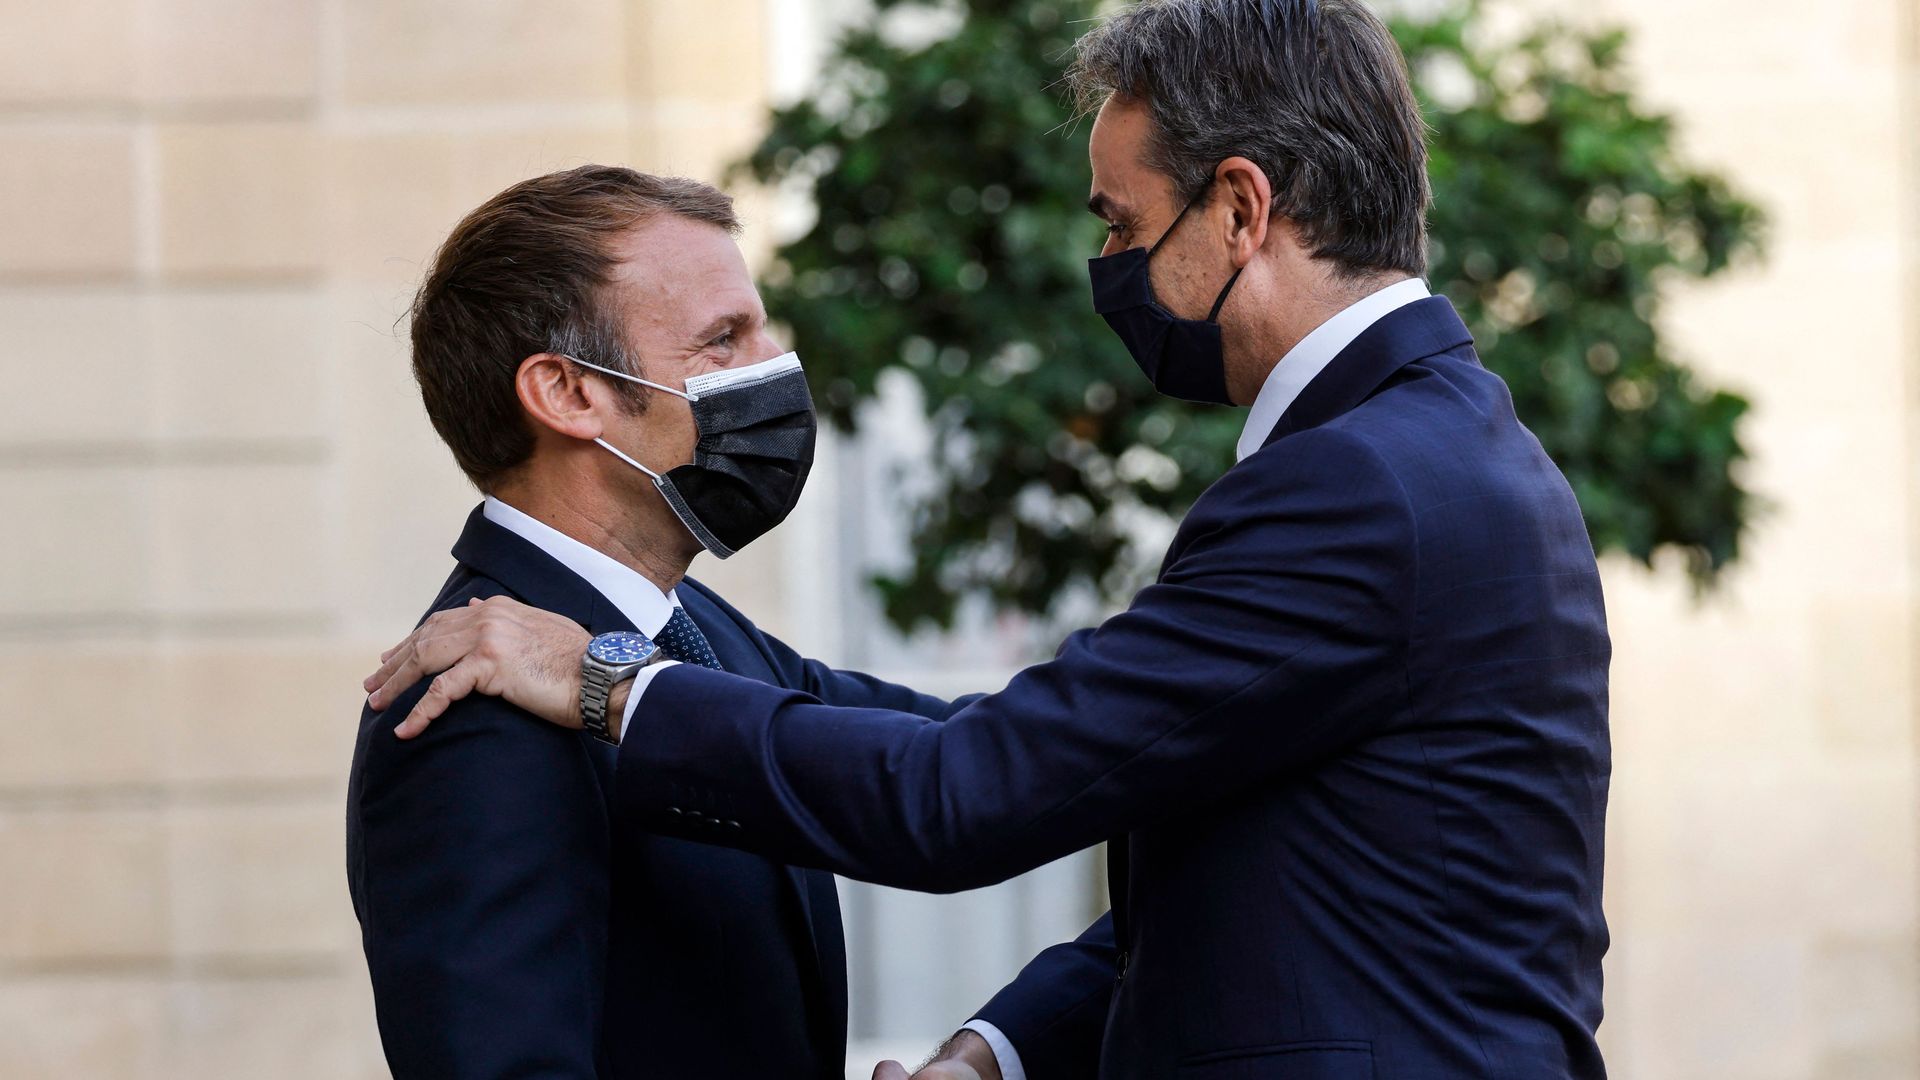 French President Emmanuel Macron (L) greets Greek Prime Minister Kyriakos Mitsotakis prior to the signing ceremony of a new defence deal at The Elysee Palace in Paris on September 28, 2021